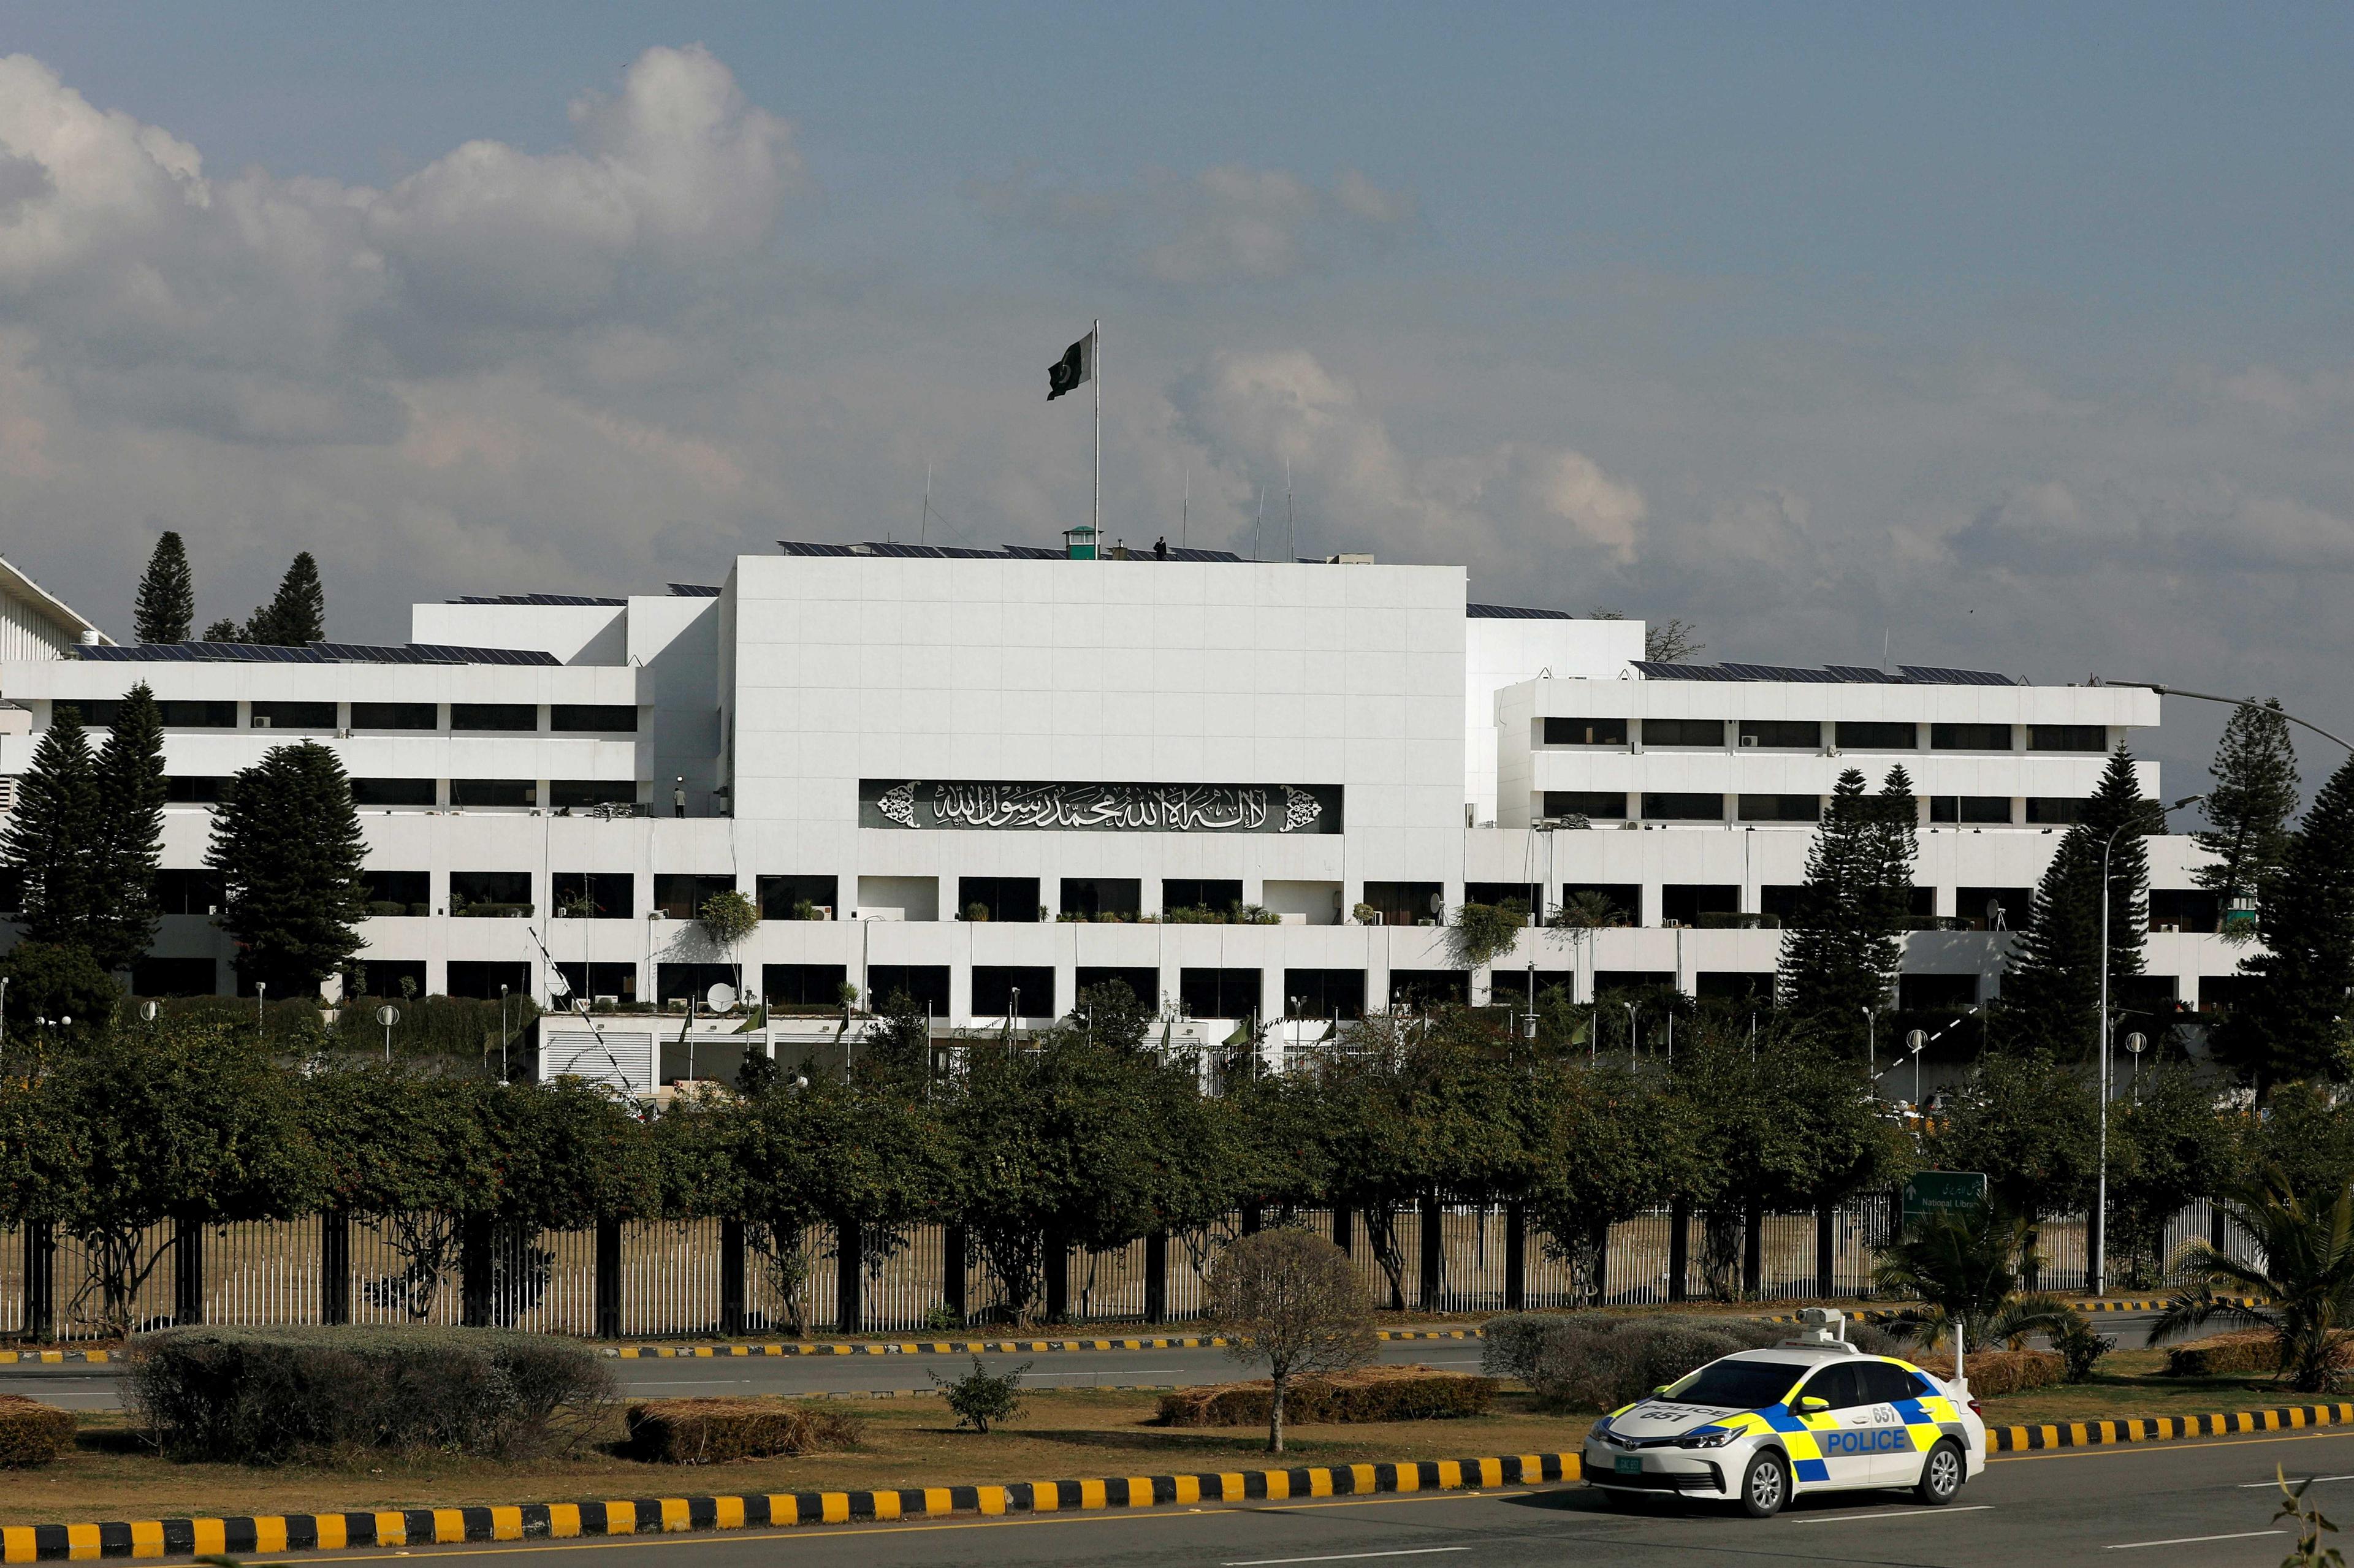 A general view of the Parliament building in Islamabad, Pakistan Jan 23, 2019. Photo: Reuters